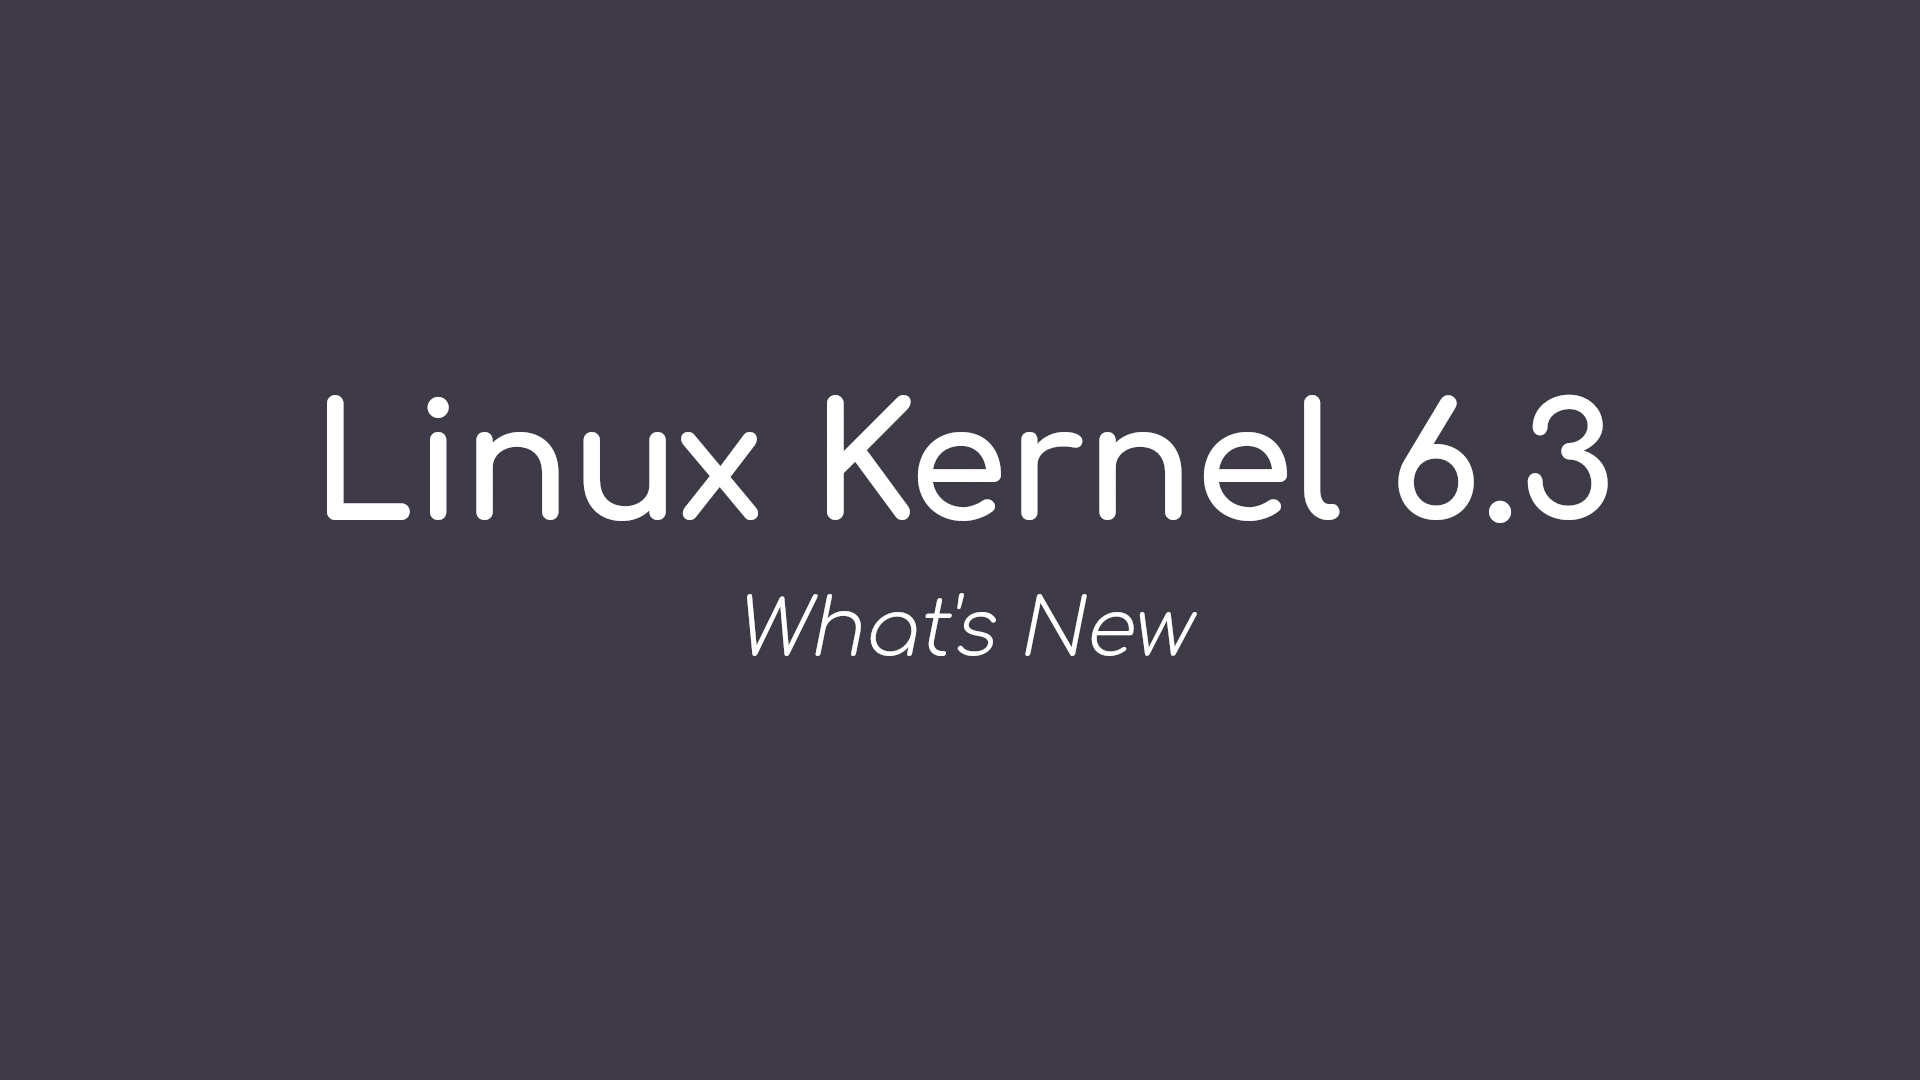 Linux Kernel 6.3 Officially Released, This Is What’s New